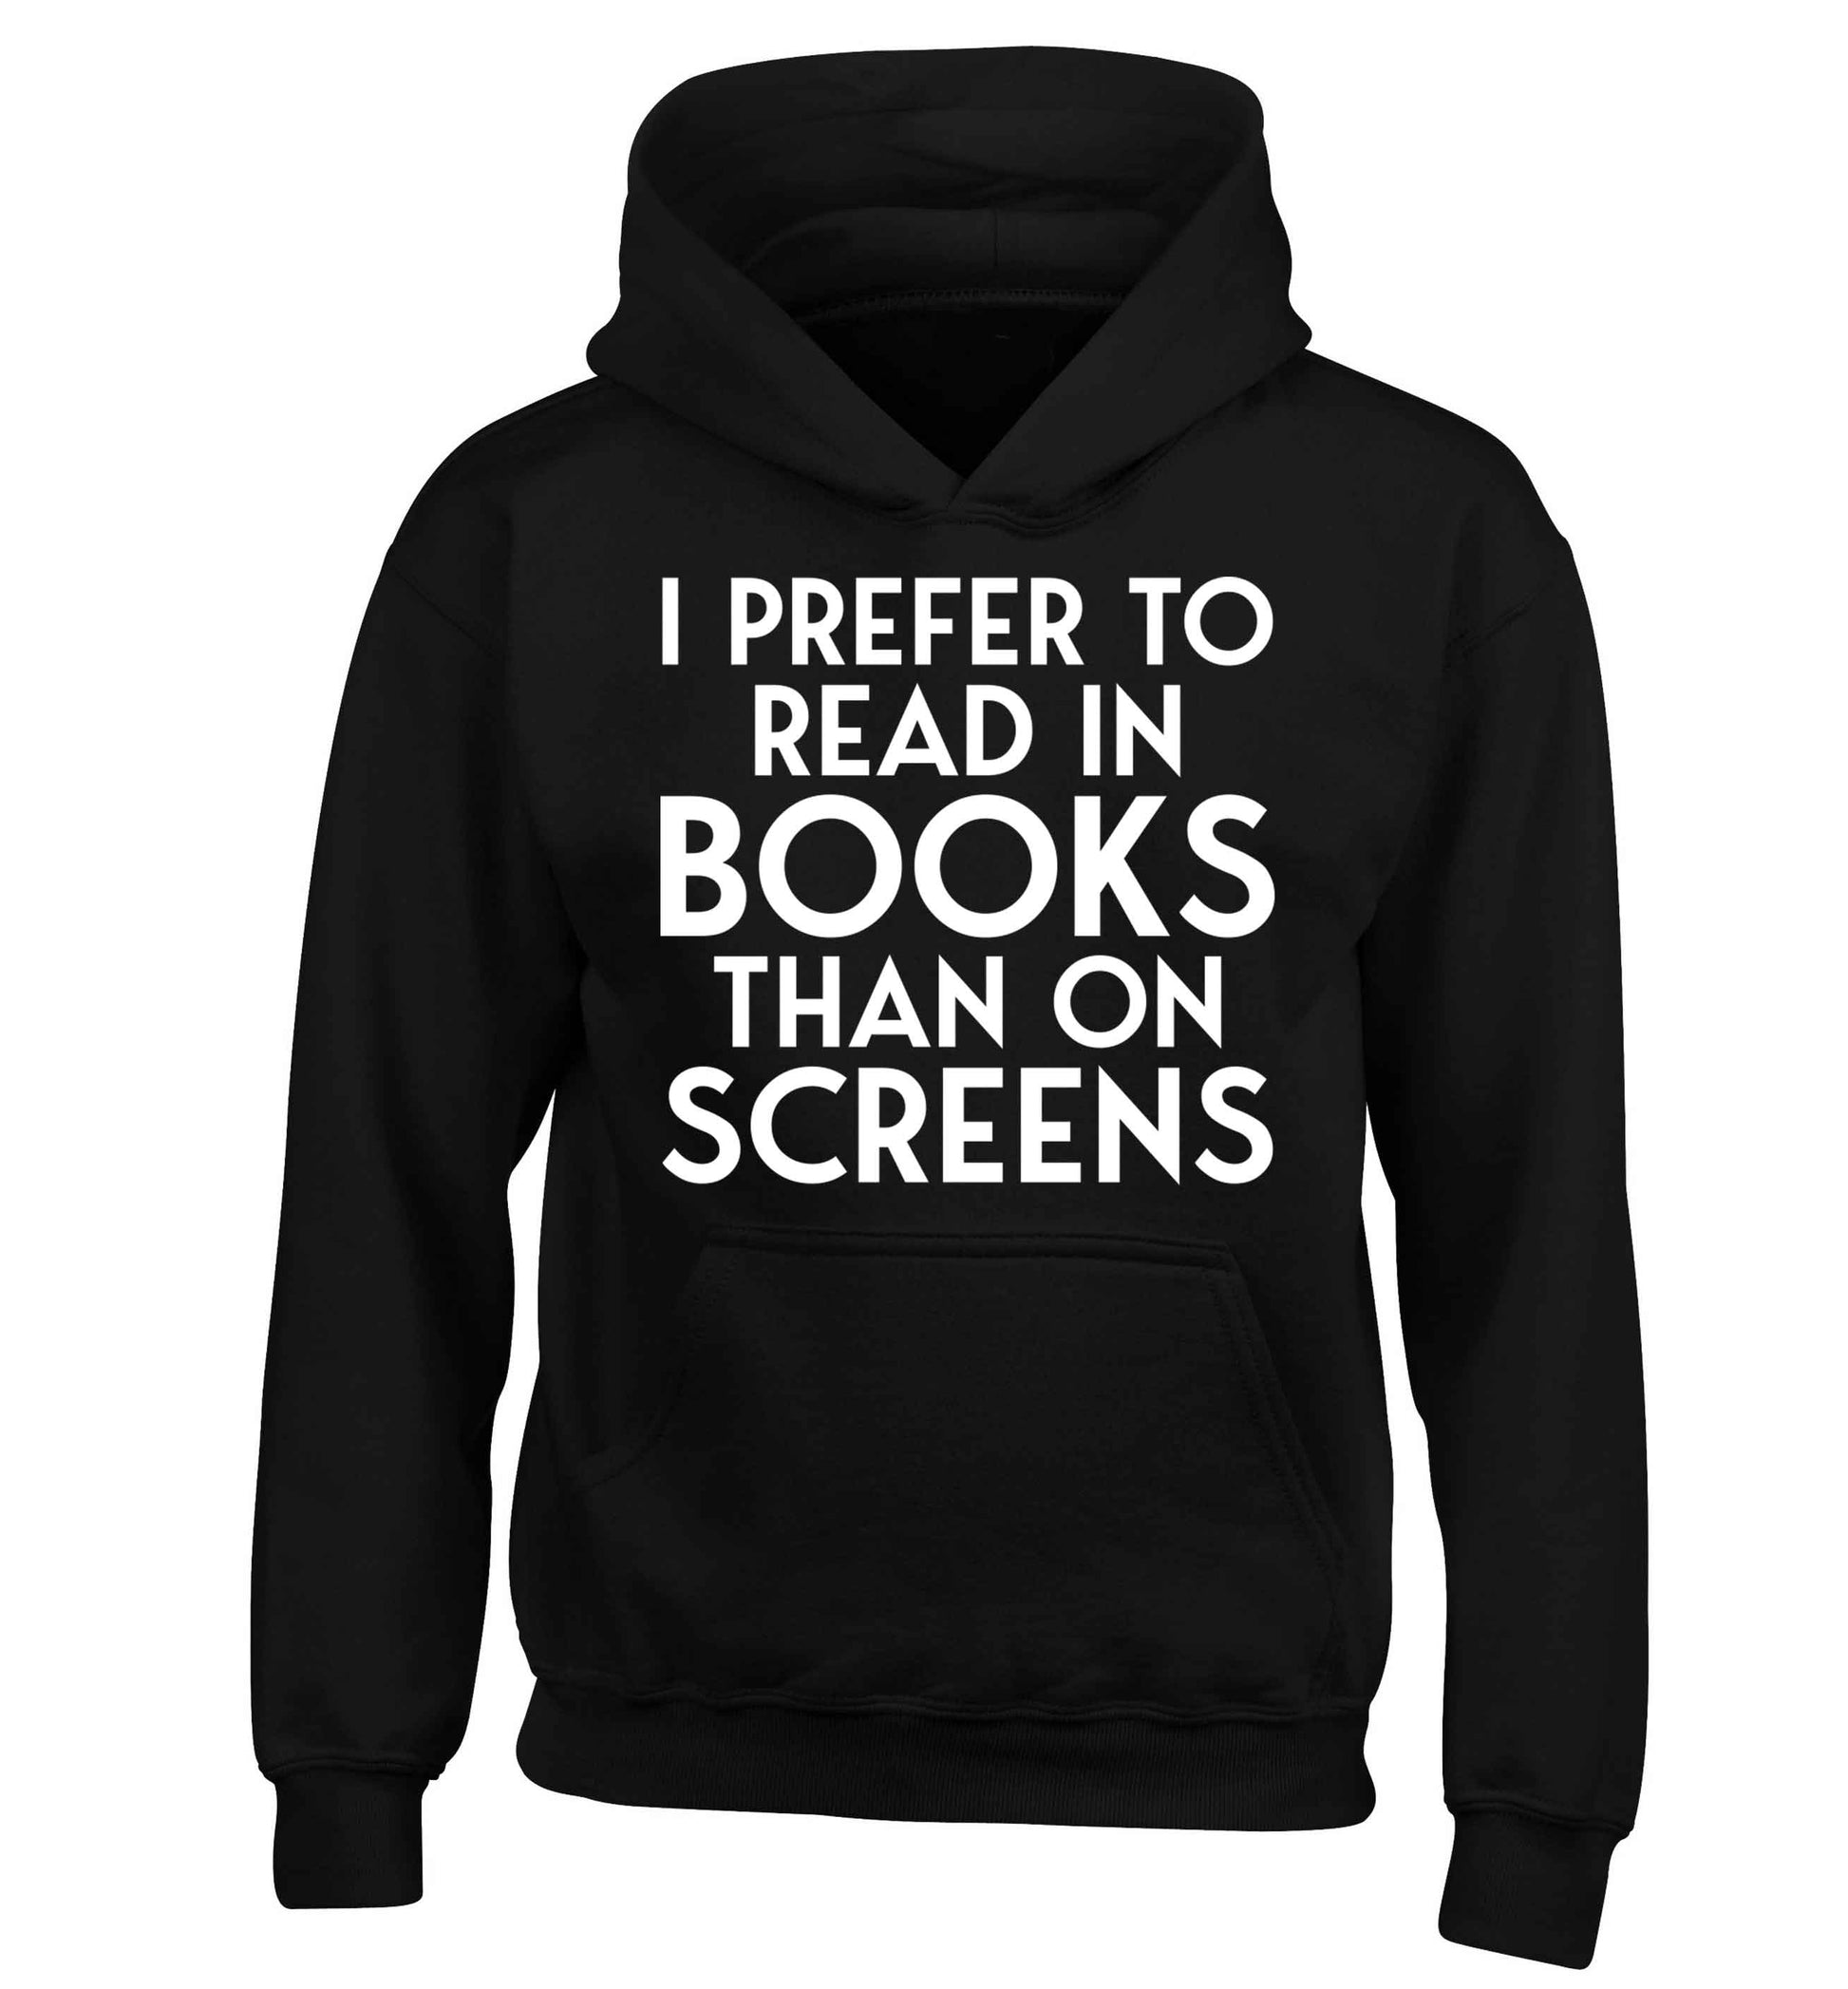 I prefer to read in books than on screens children's black hoodie 12-13 Years